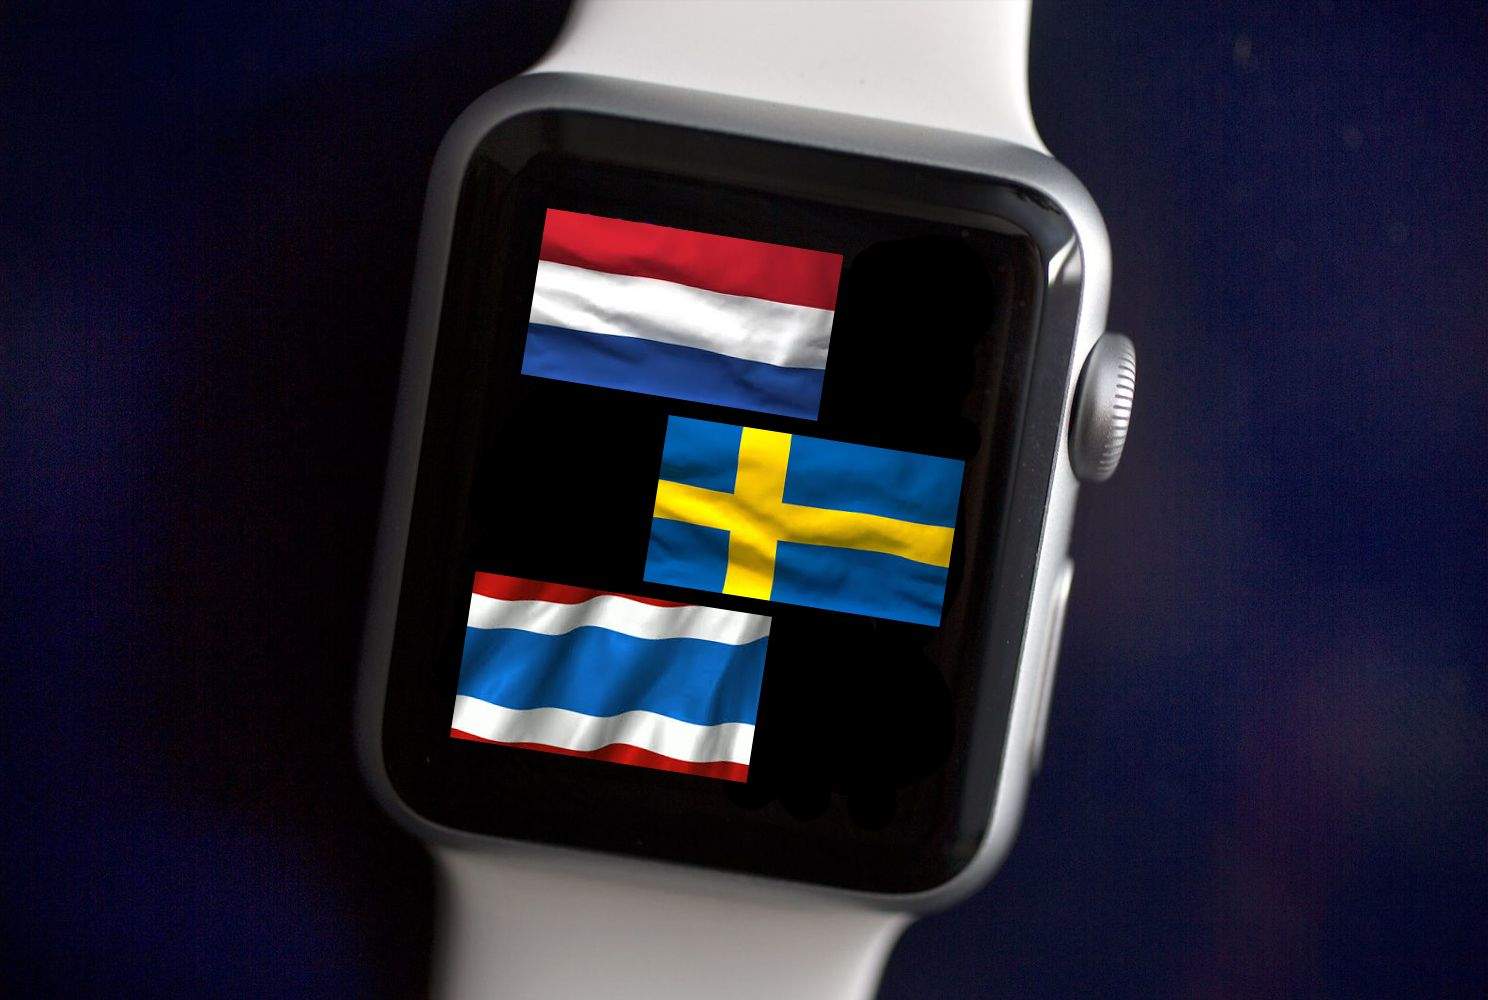 Upcoming Apple Watch countries